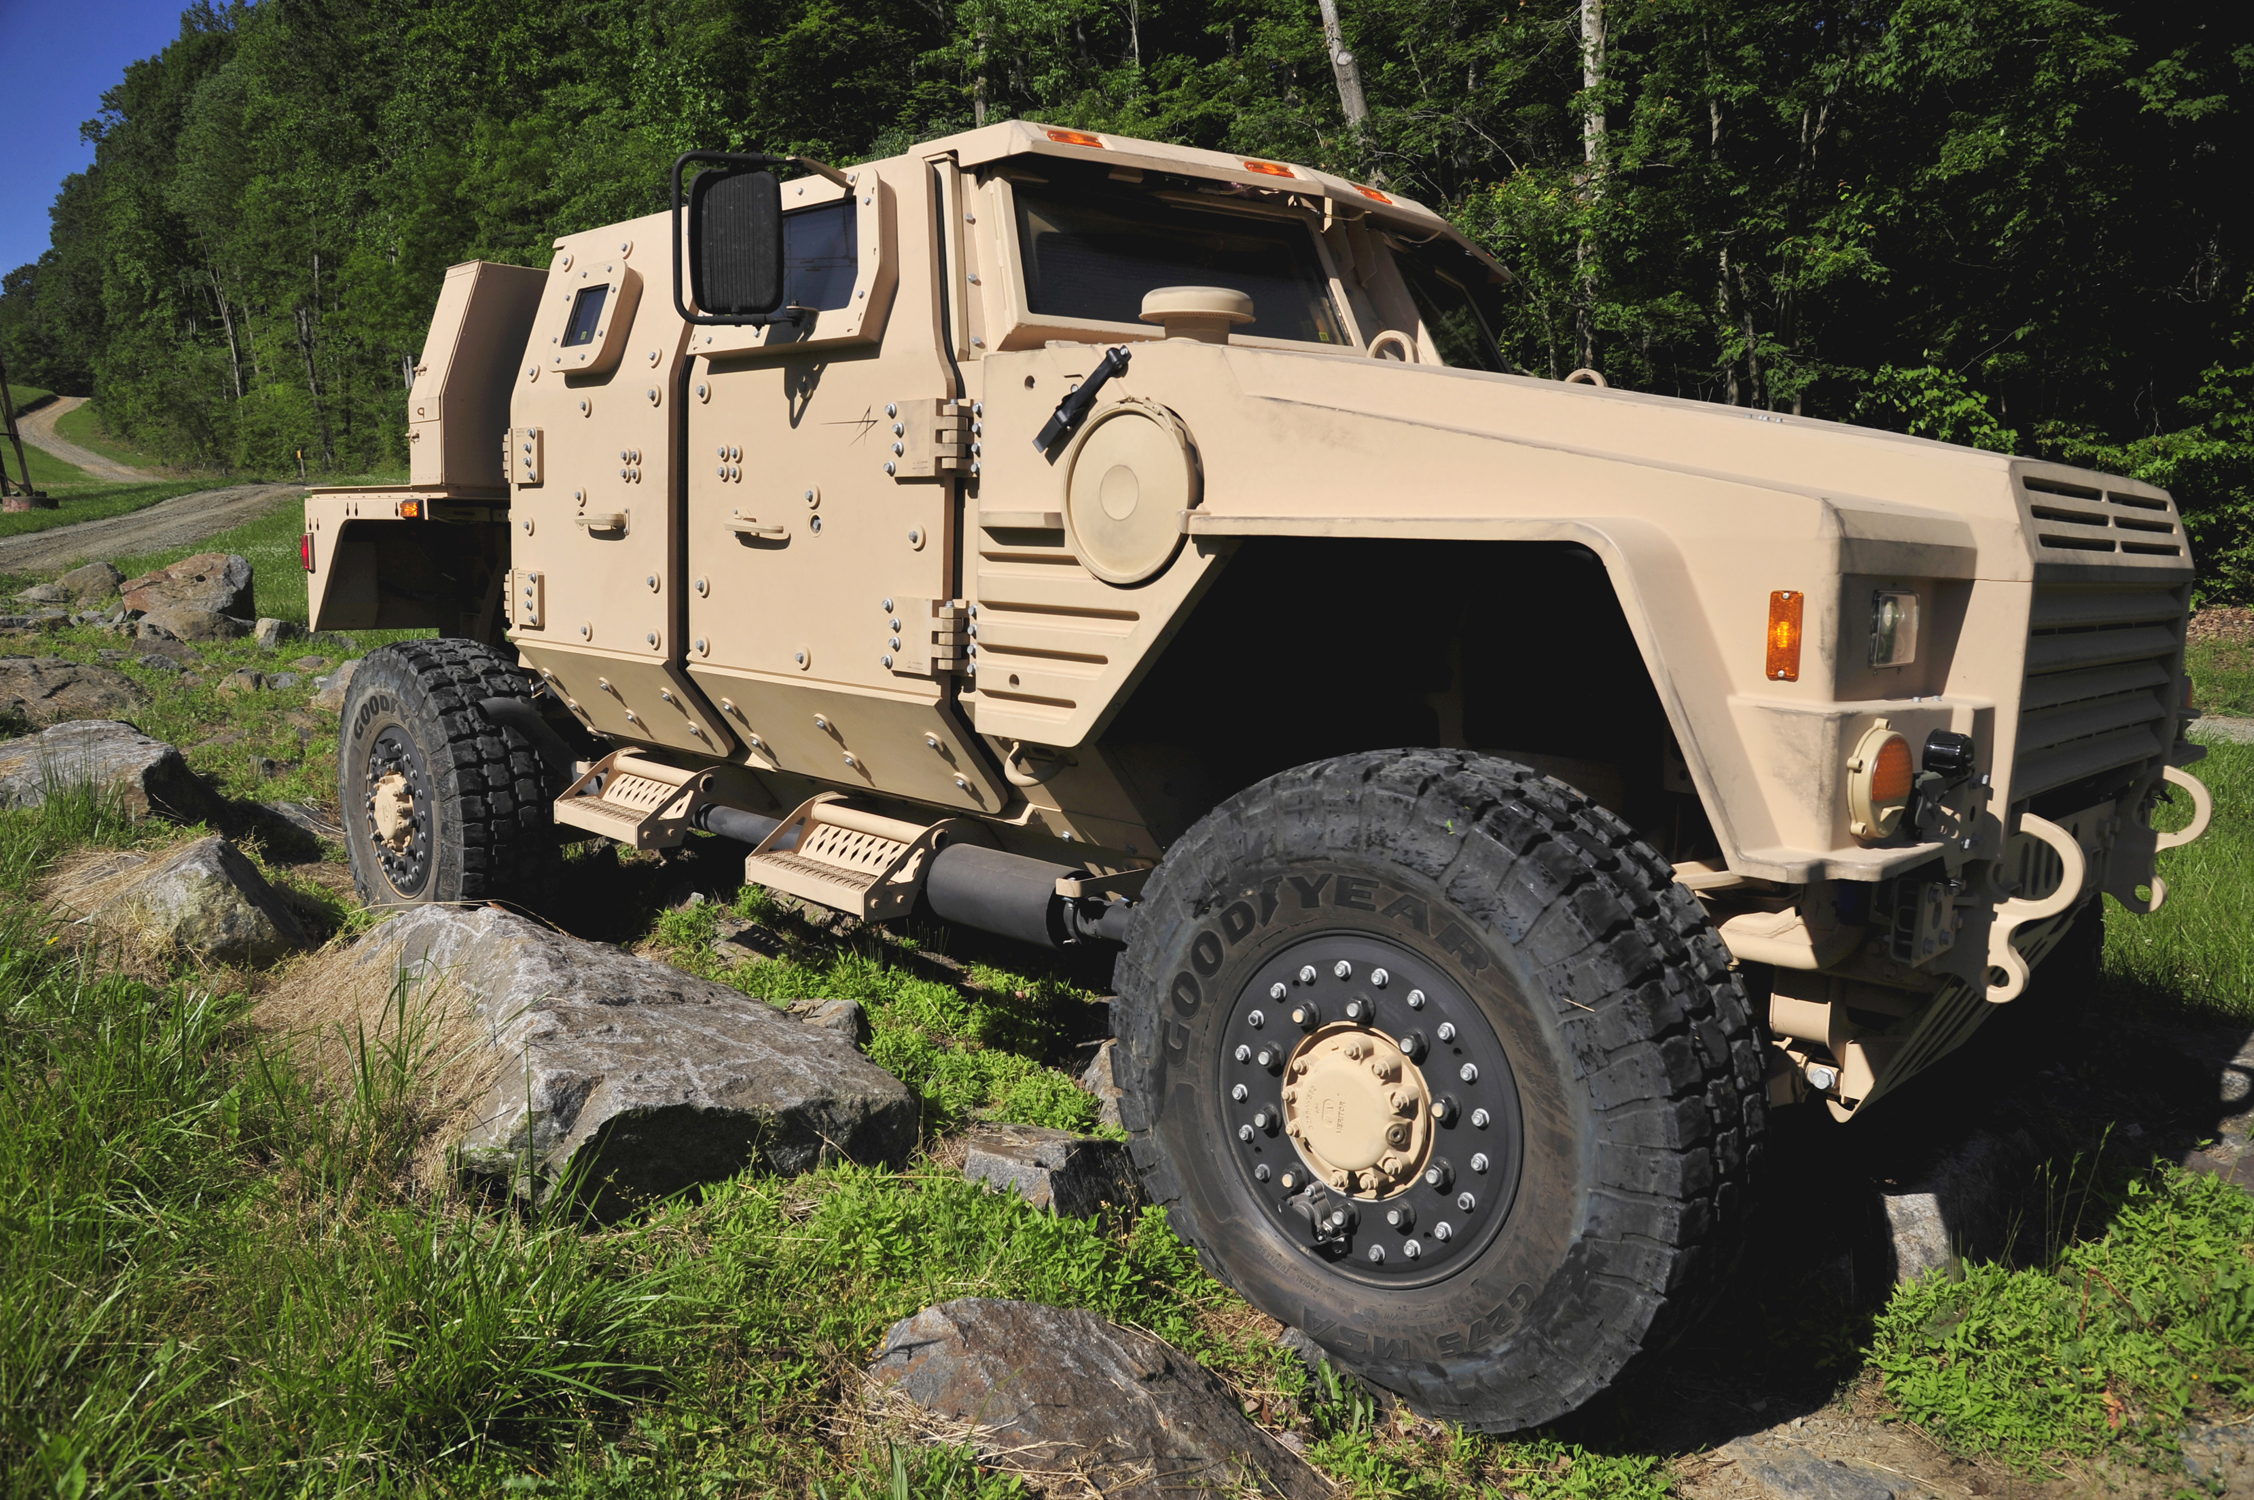 Joint Light Tactical Vehicle #18